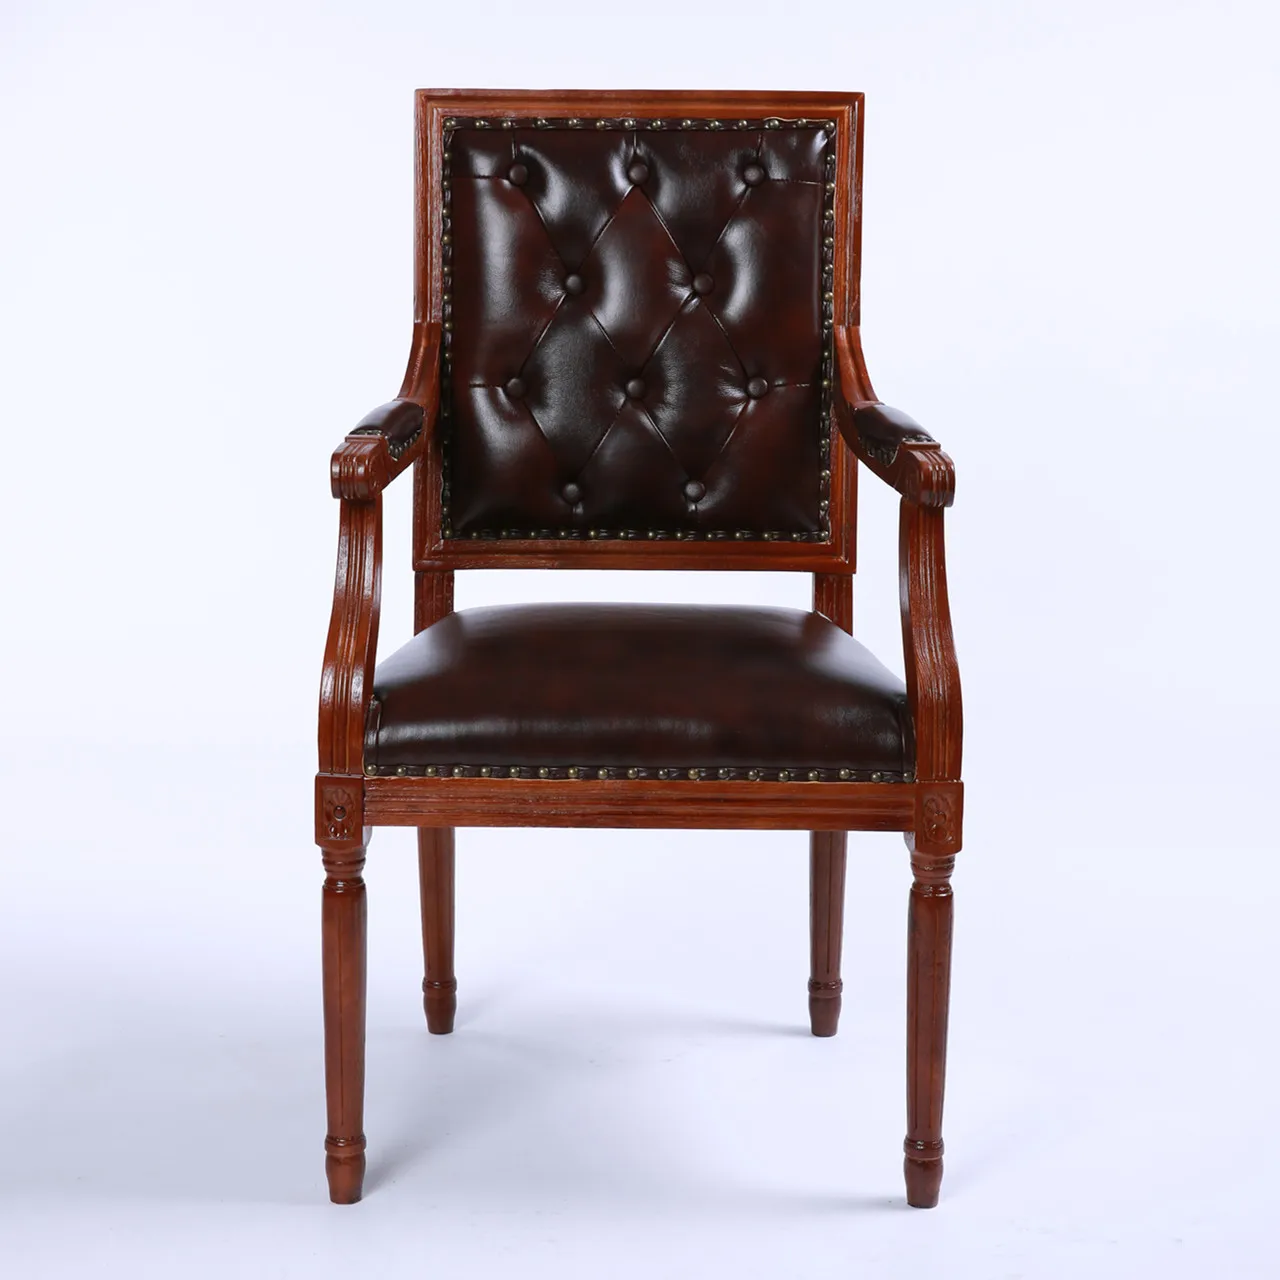 Europe's Best Selling Velvet Linen Synthetic Leather Hotel Dining Chair